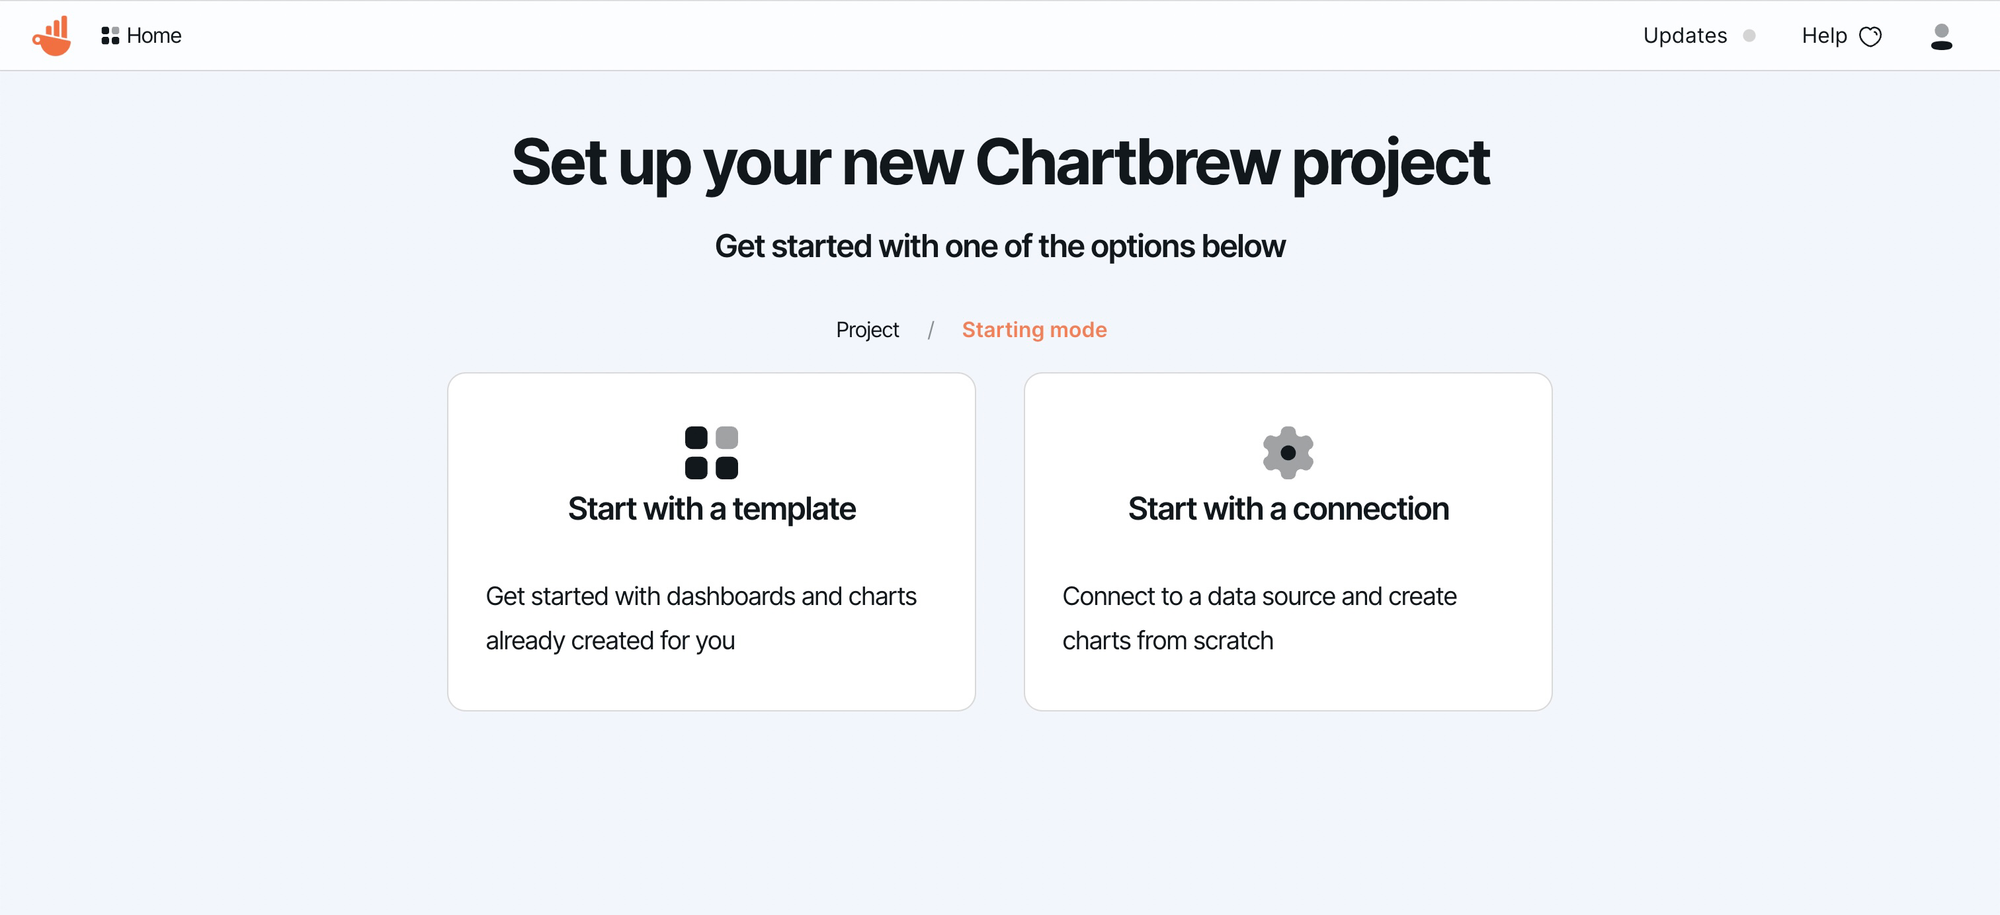 Onboarding starting mode in Chartbrew